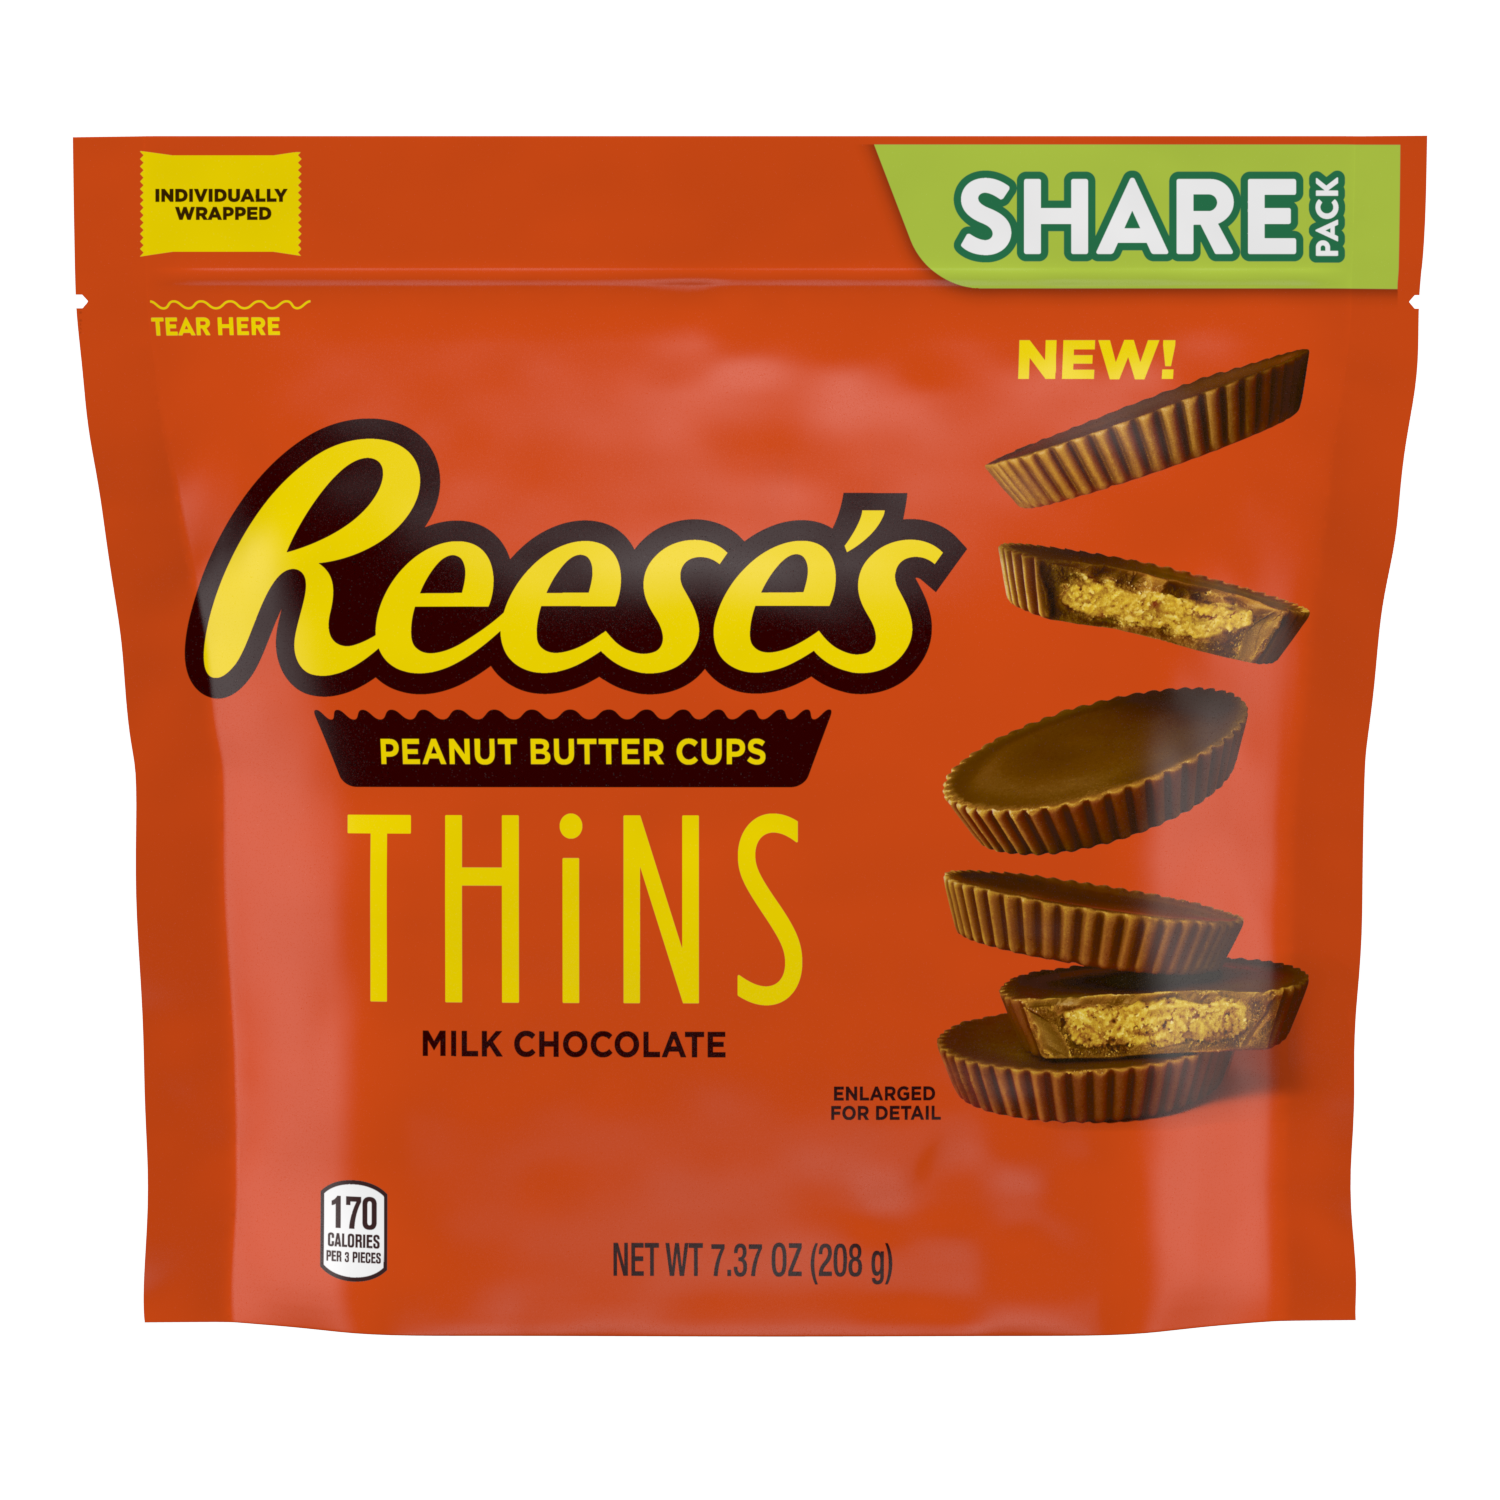 Share Pack    Reese's Peanut Butter Cups Thins